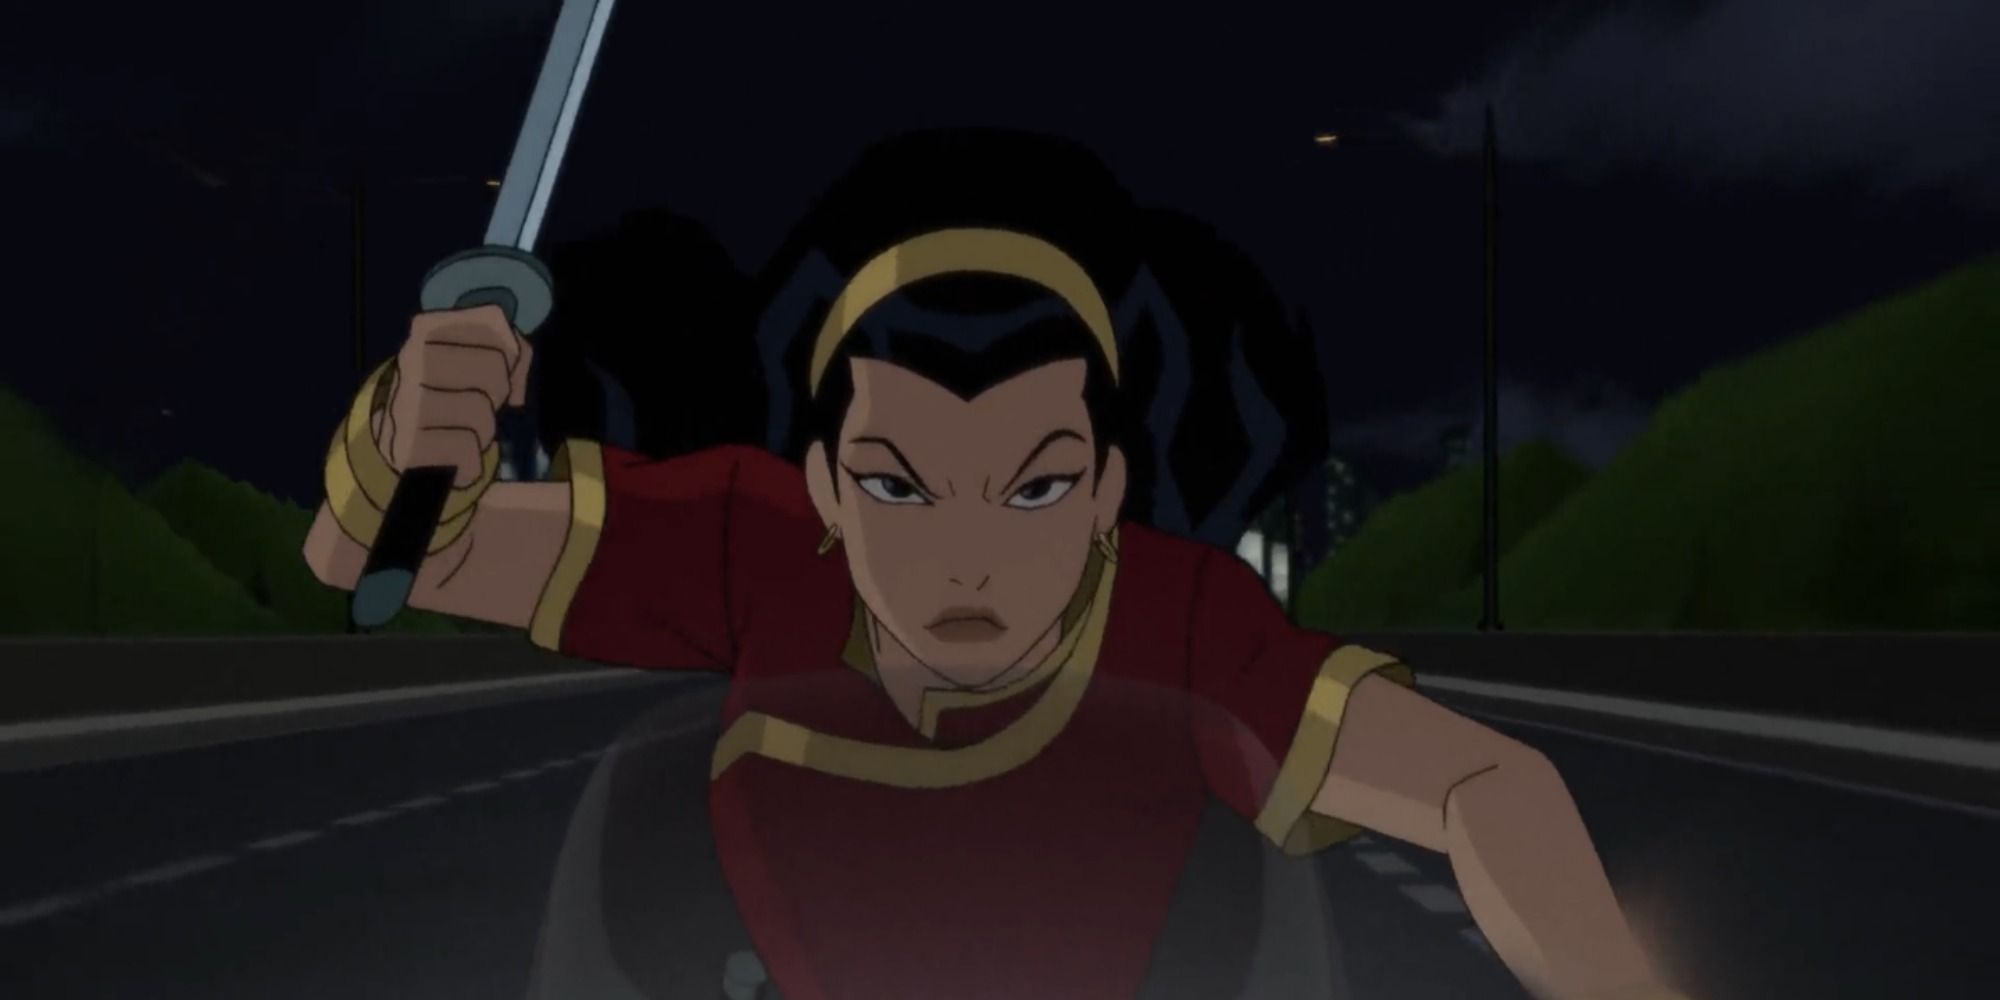 Lady Shiva sword in hand in the DCAU